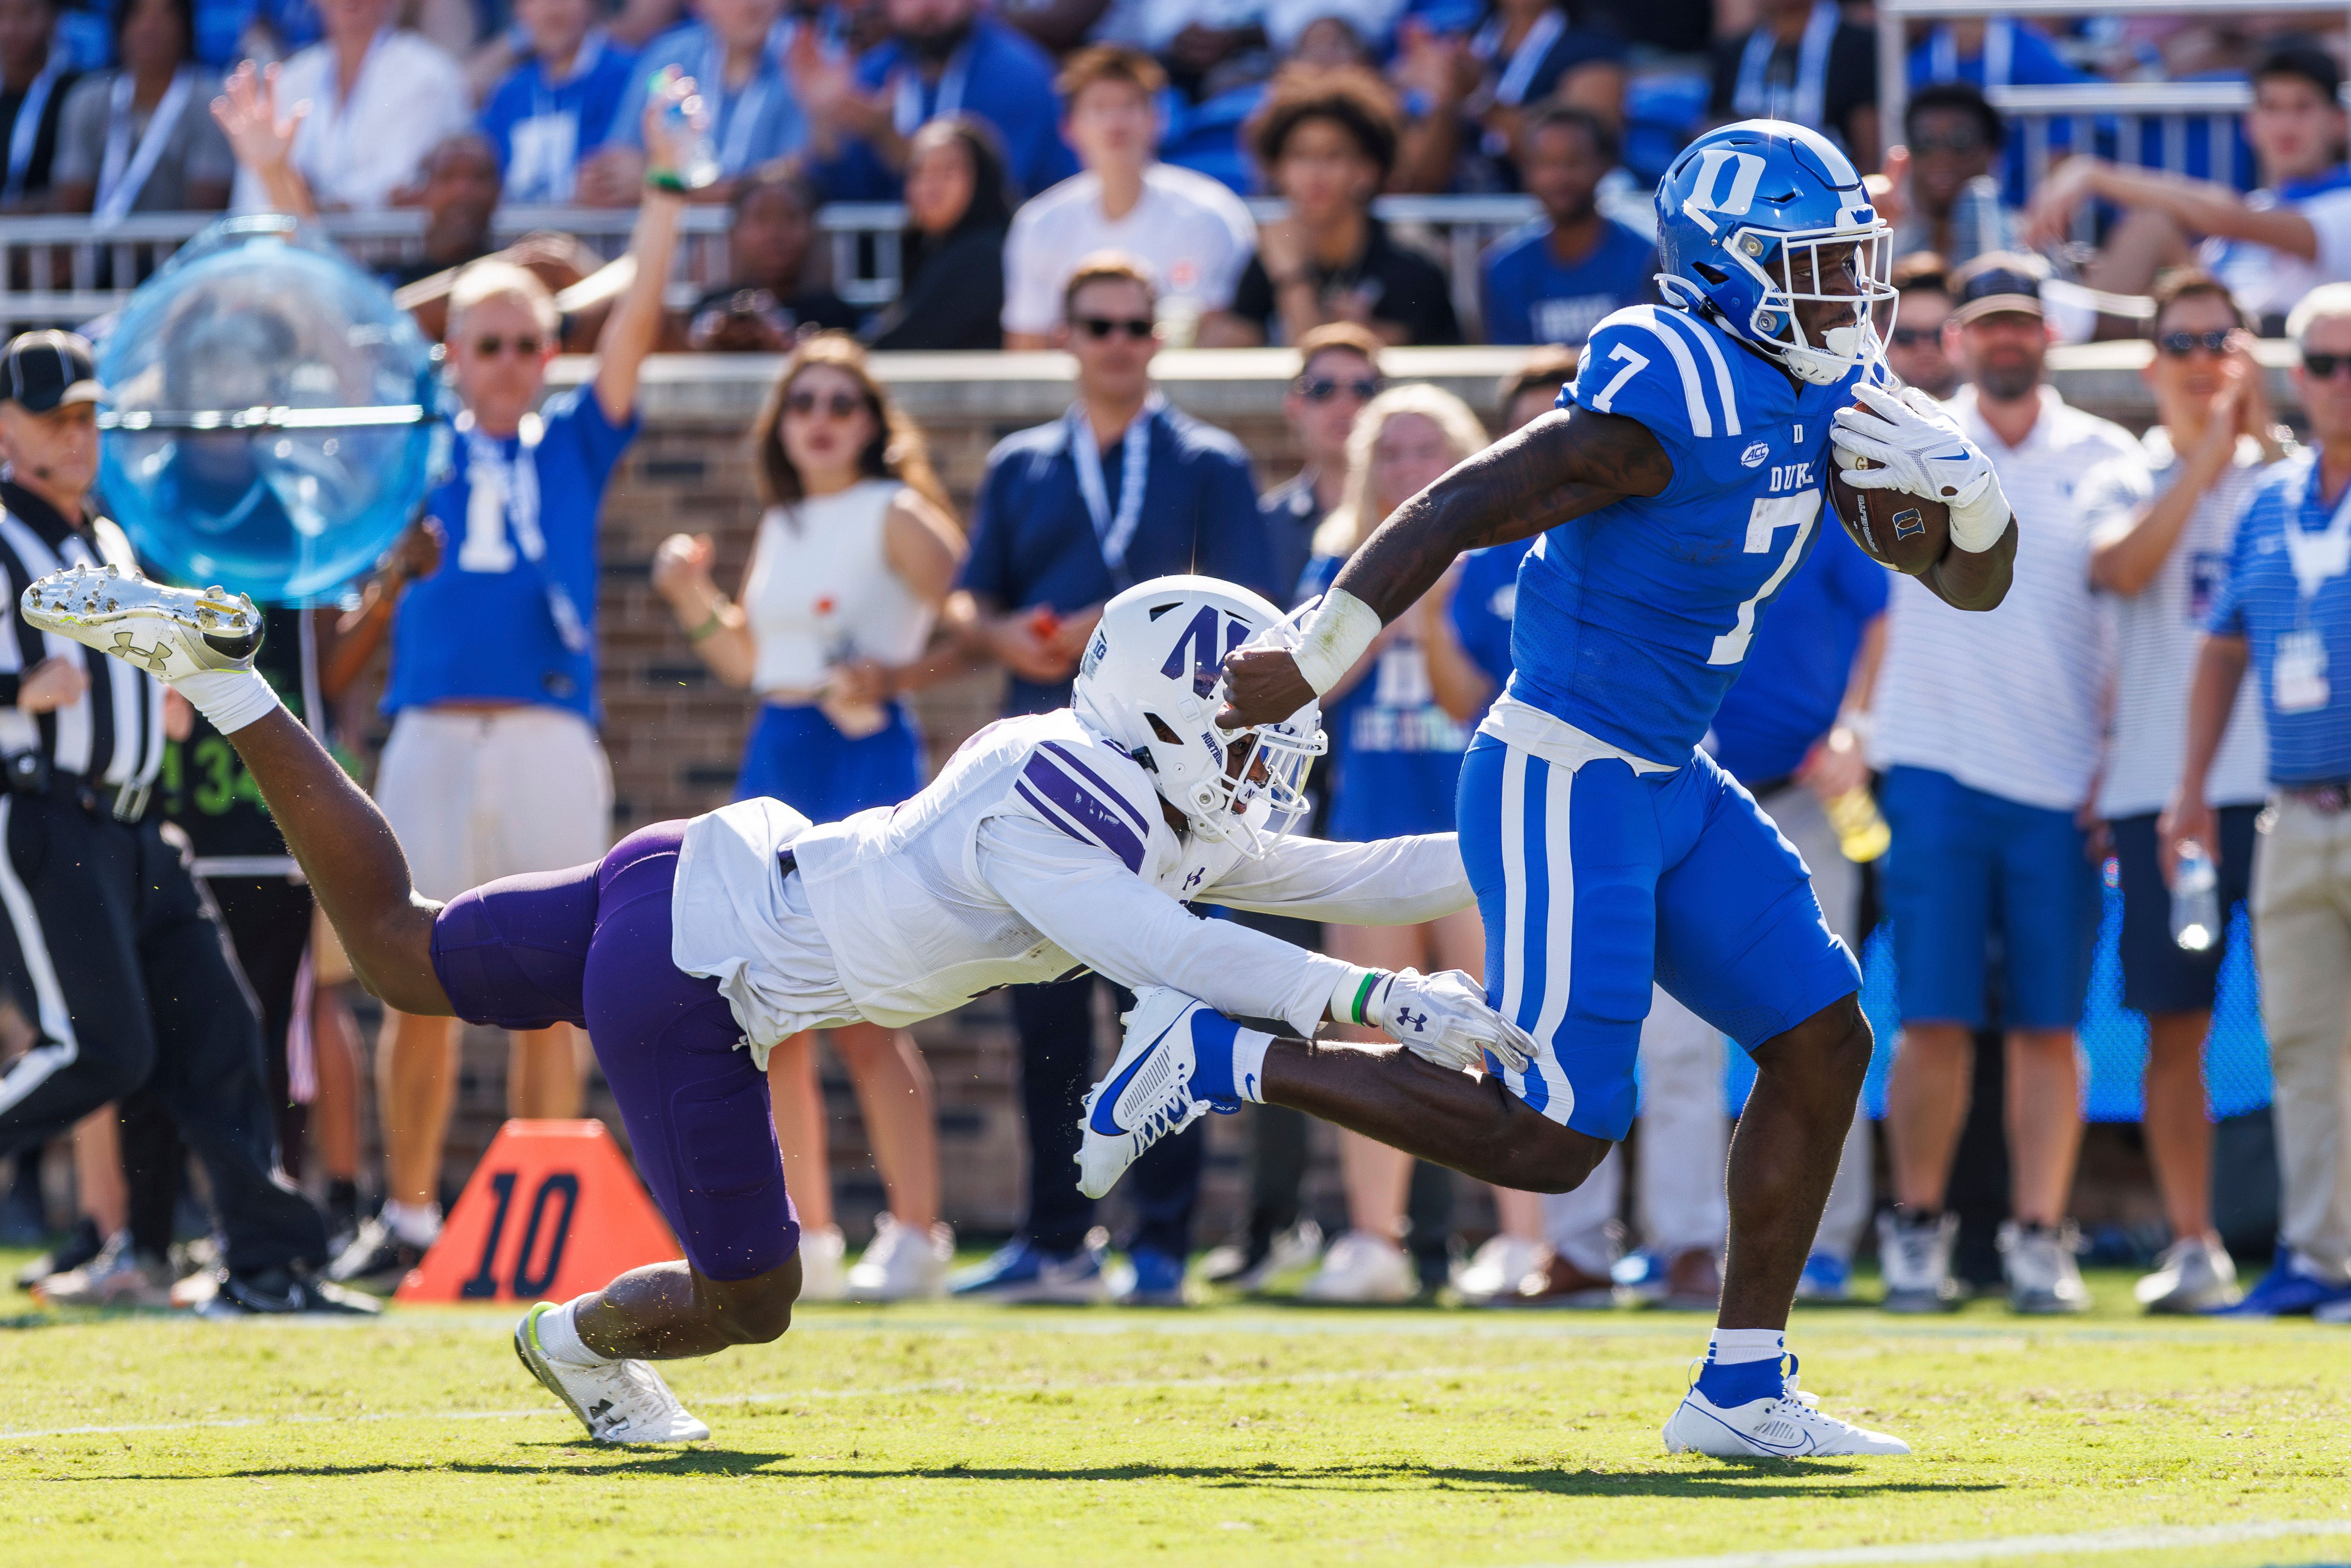 Riley Leonard runs for two touchdowns to lead No. 21 Duke over